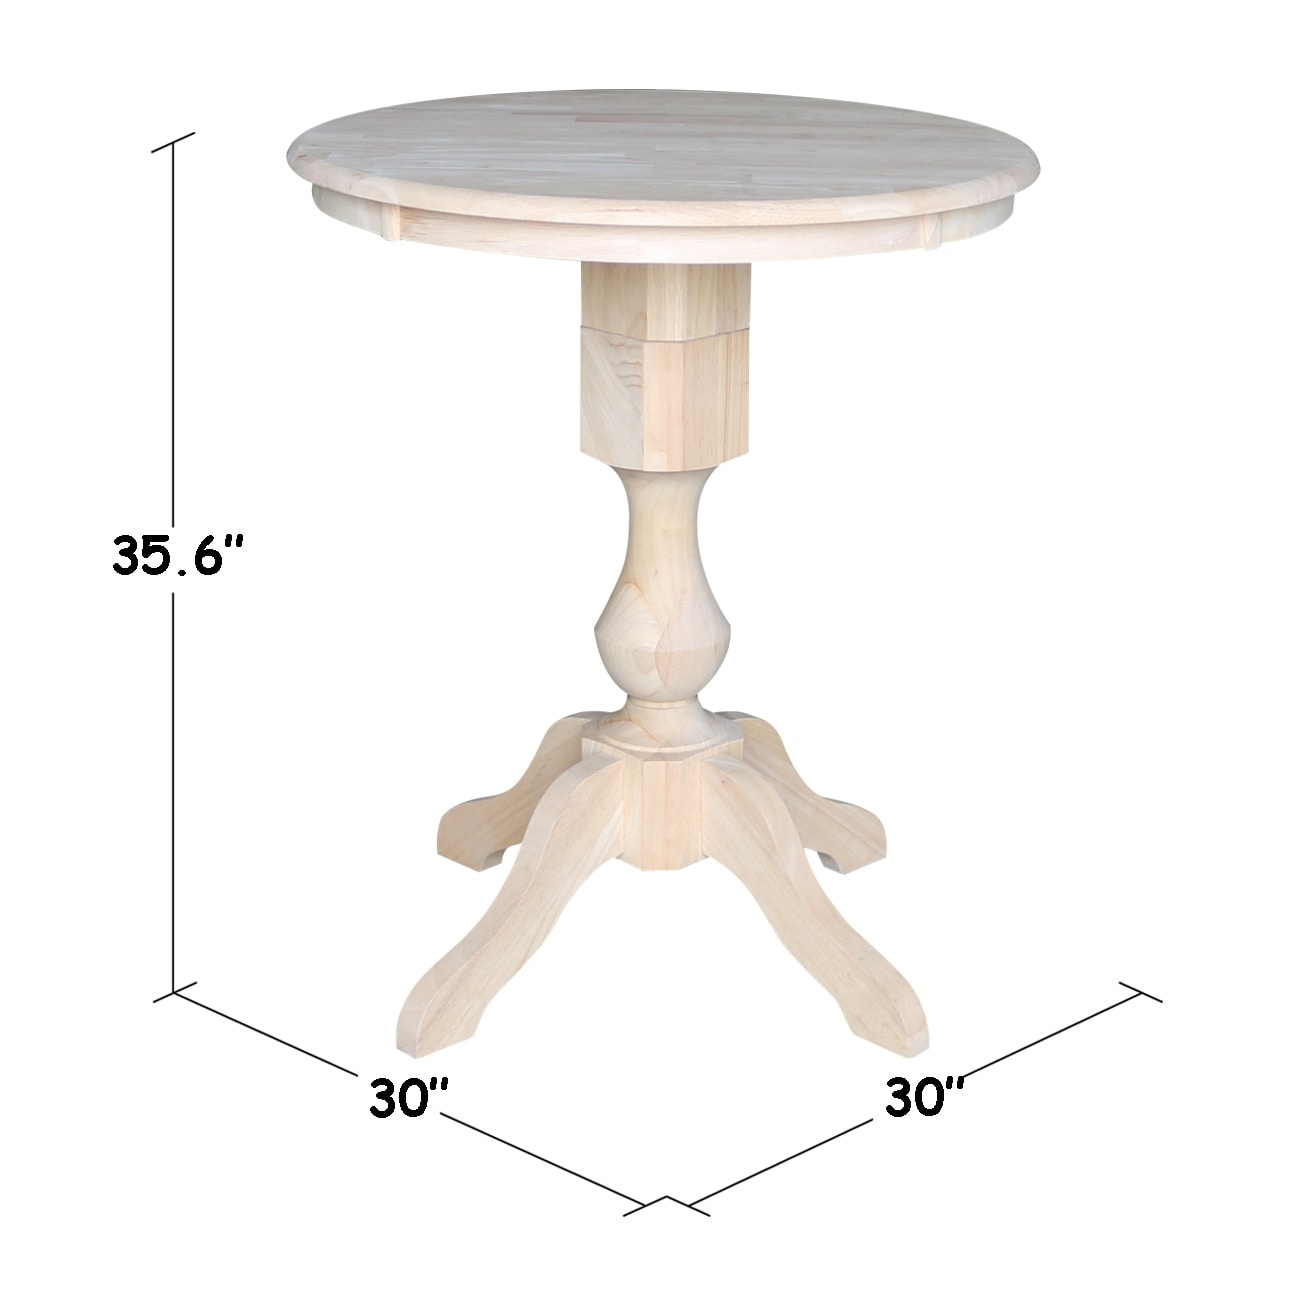 Solid Wood 30 X 30 Round Pedestal Table Overstock 20709618